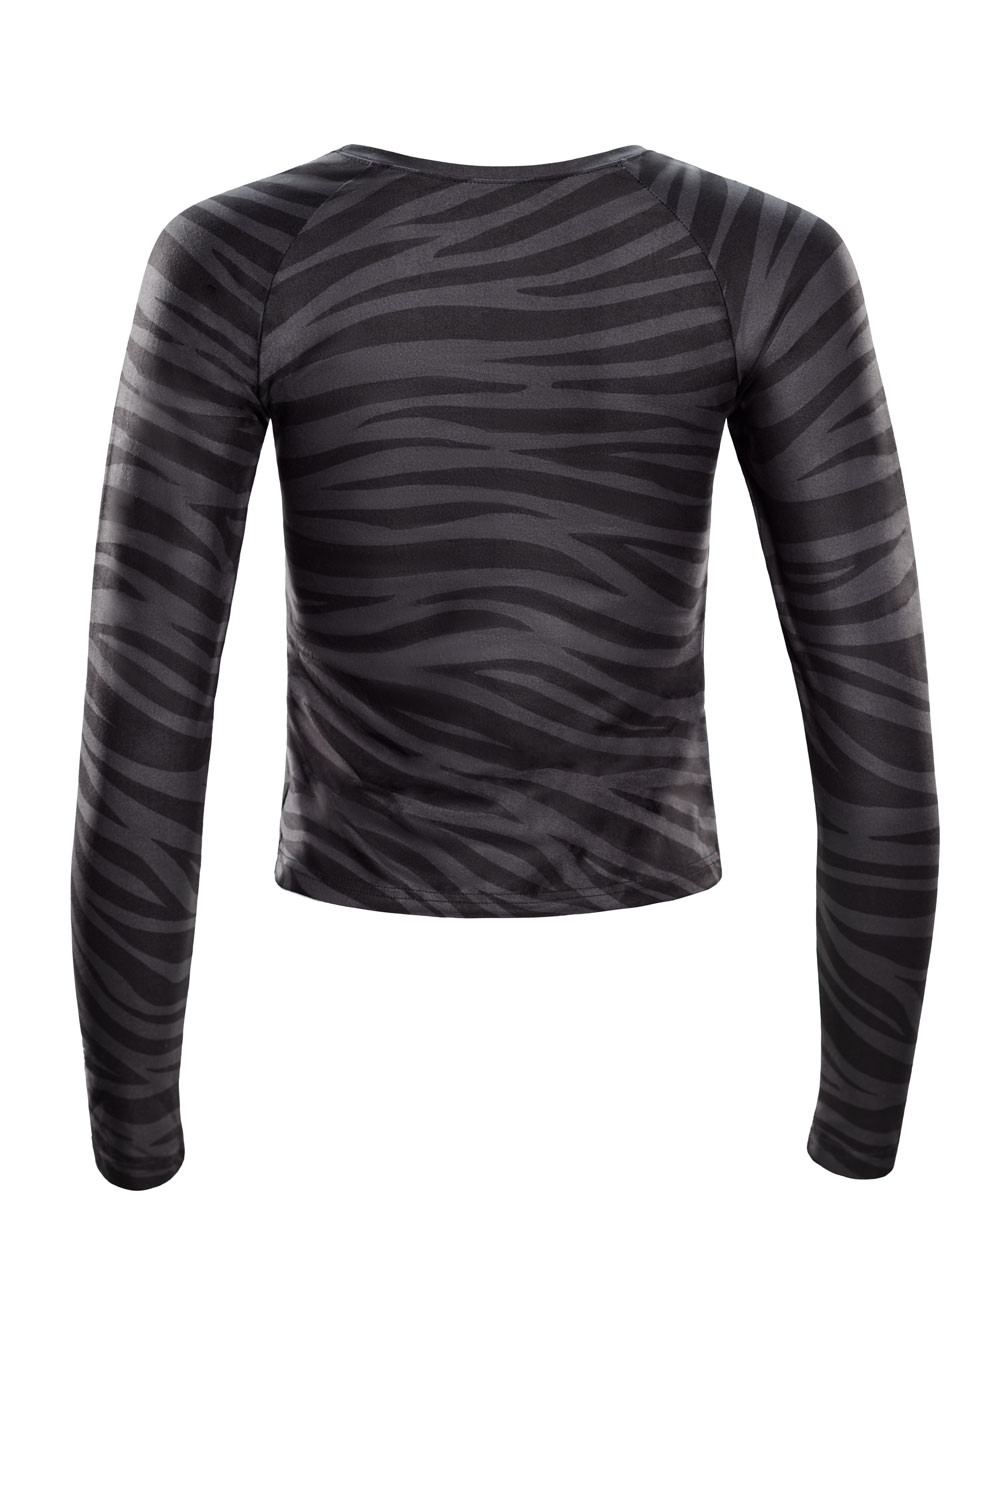 Functional Light and Soft Cropped Ultra Long Sleeve Soft Zebra, Winshape AET119LS, Top Style